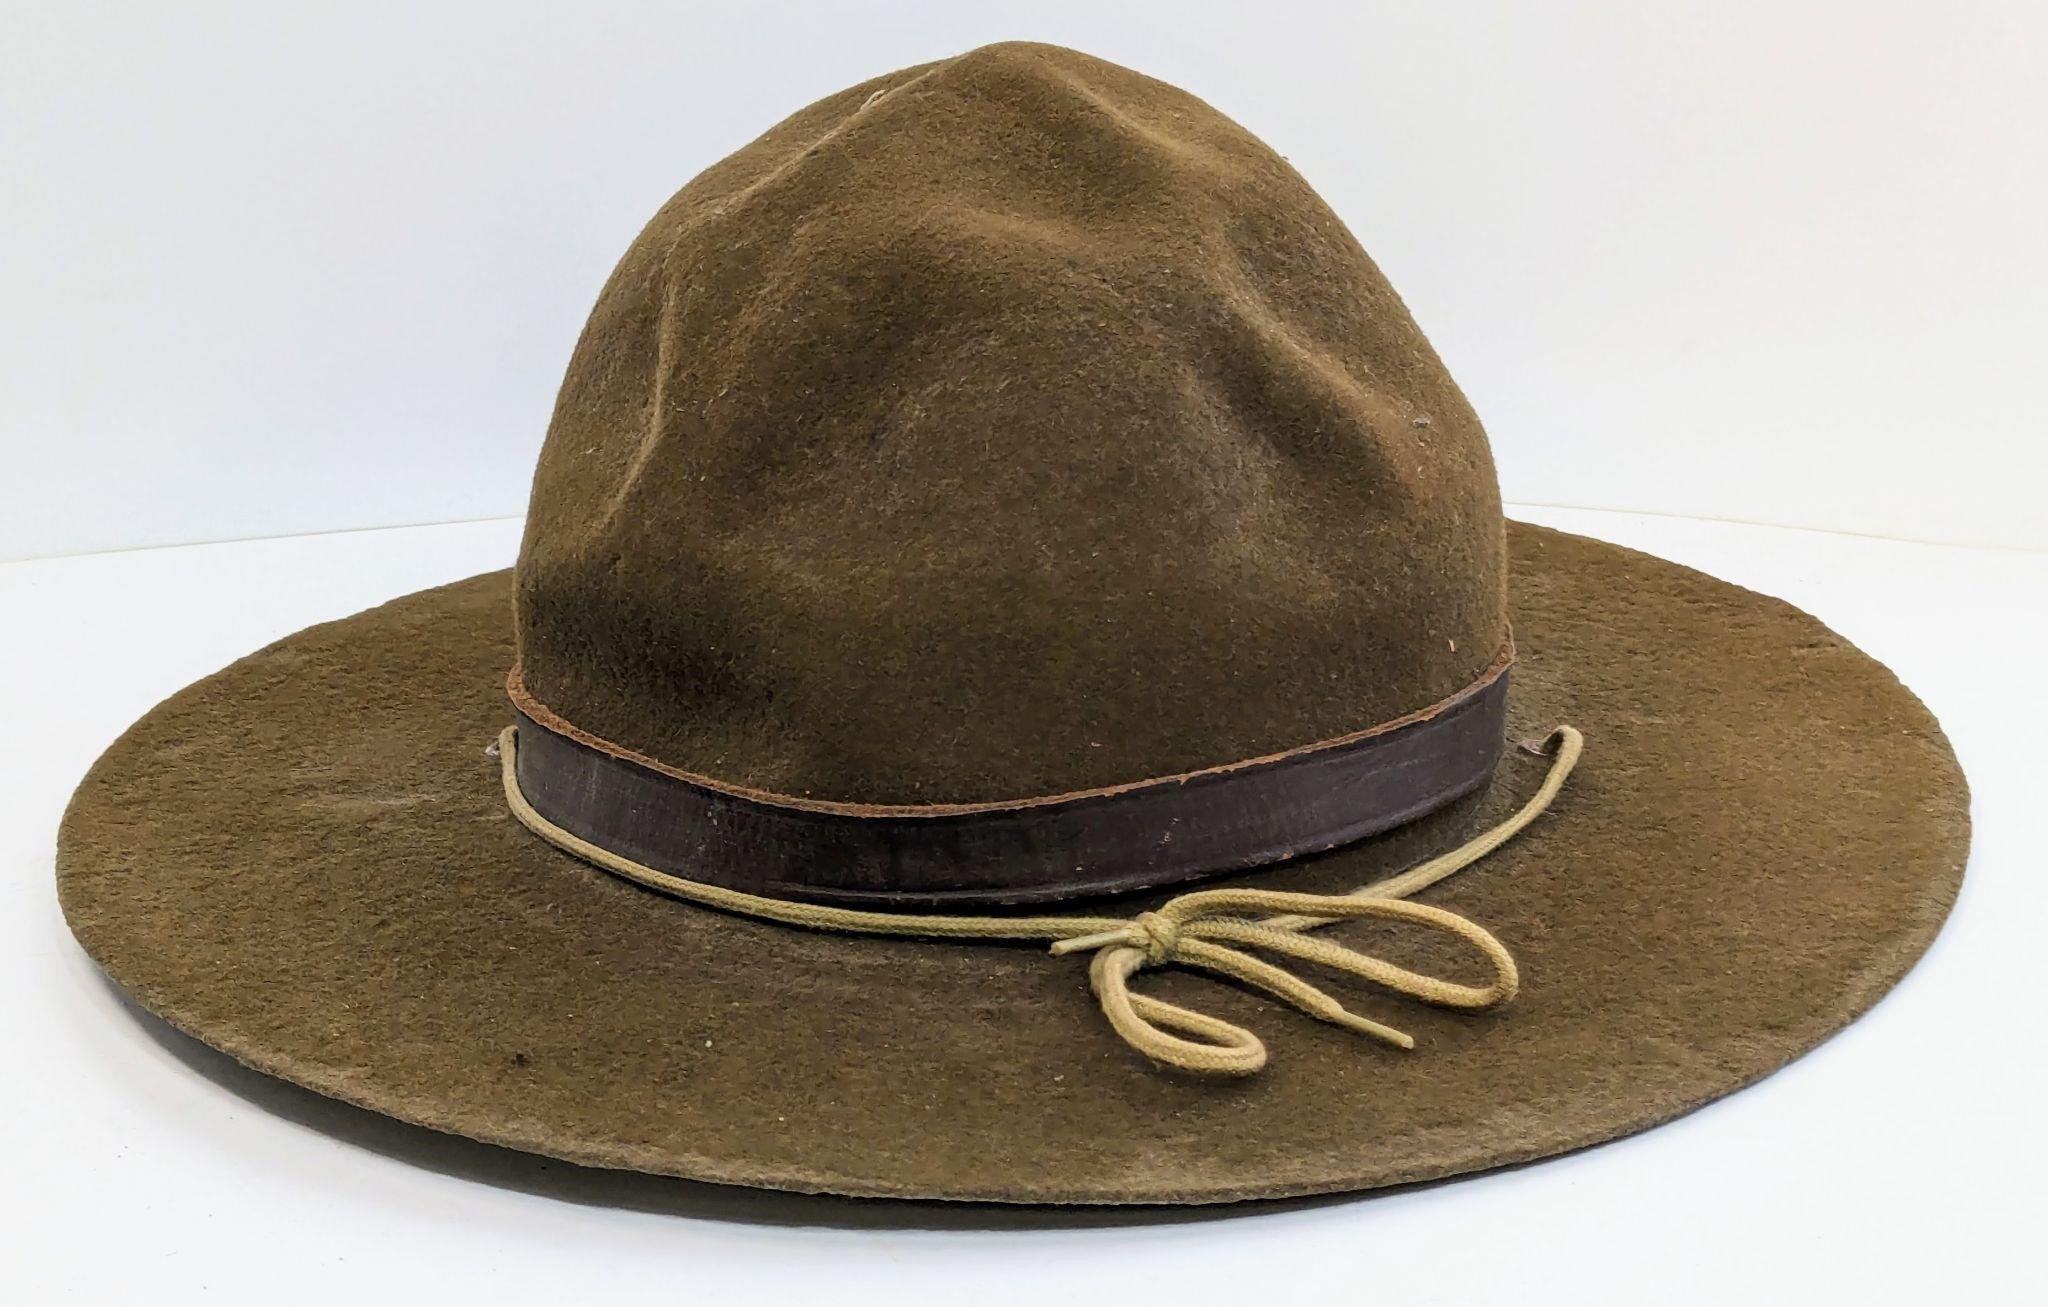 boy scout hat, boy scout hat Suppliers and Manufacturers at